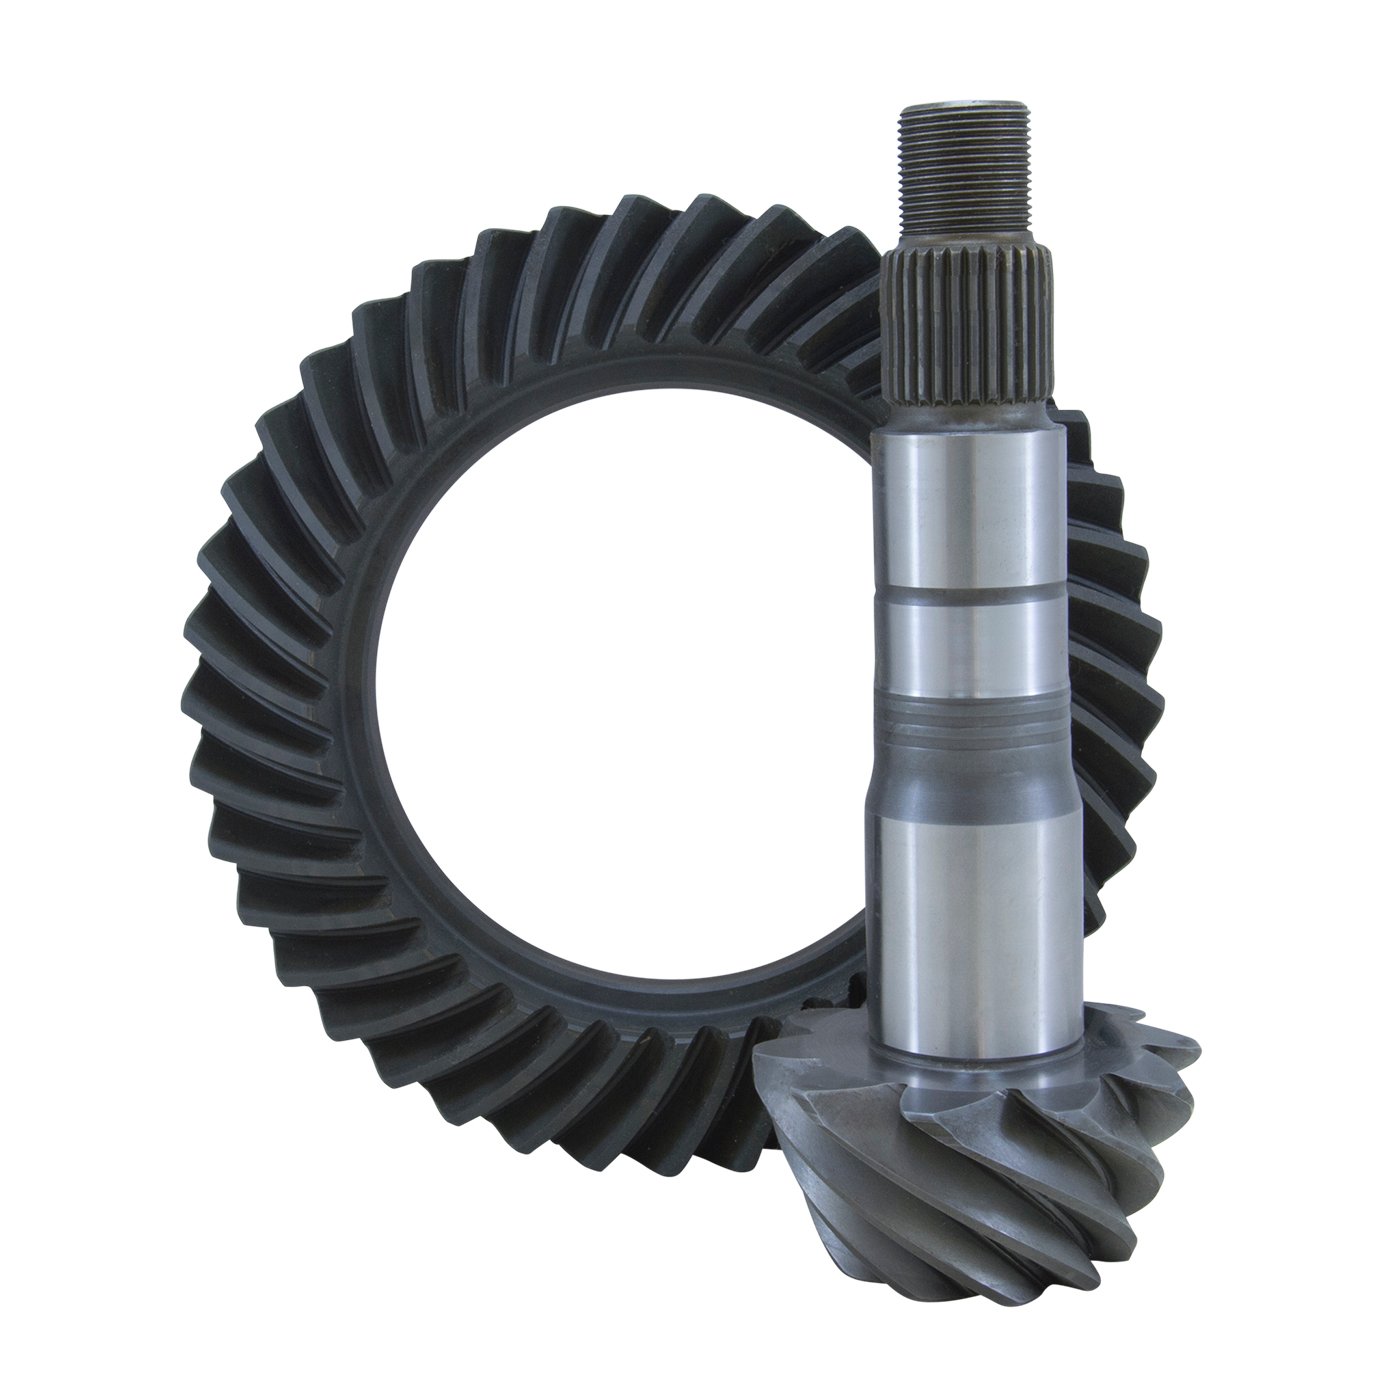 USA Standard ZG T100-529 Ring & Pinion Gear Set, For Toyota T100 And Tacoma, 5.29 Ratio